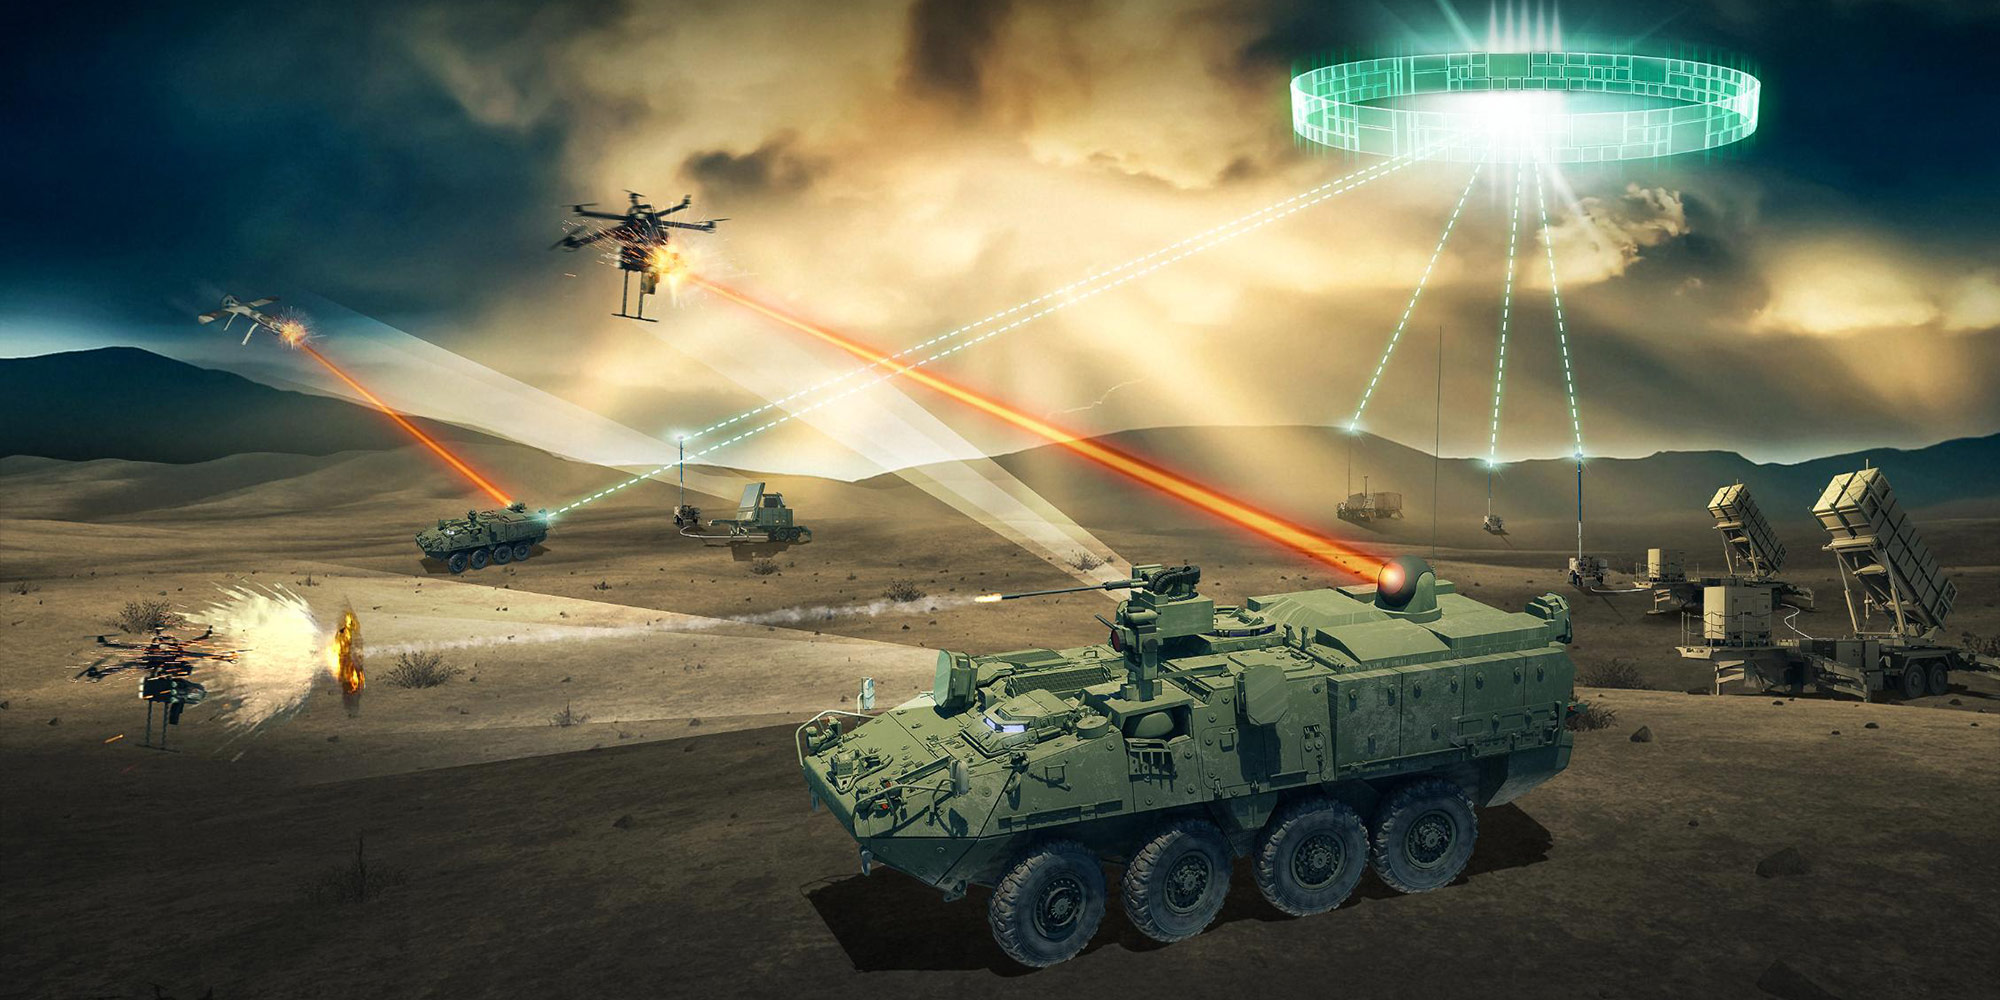 Tanks shooting lasers at unmanned aerial vehicles